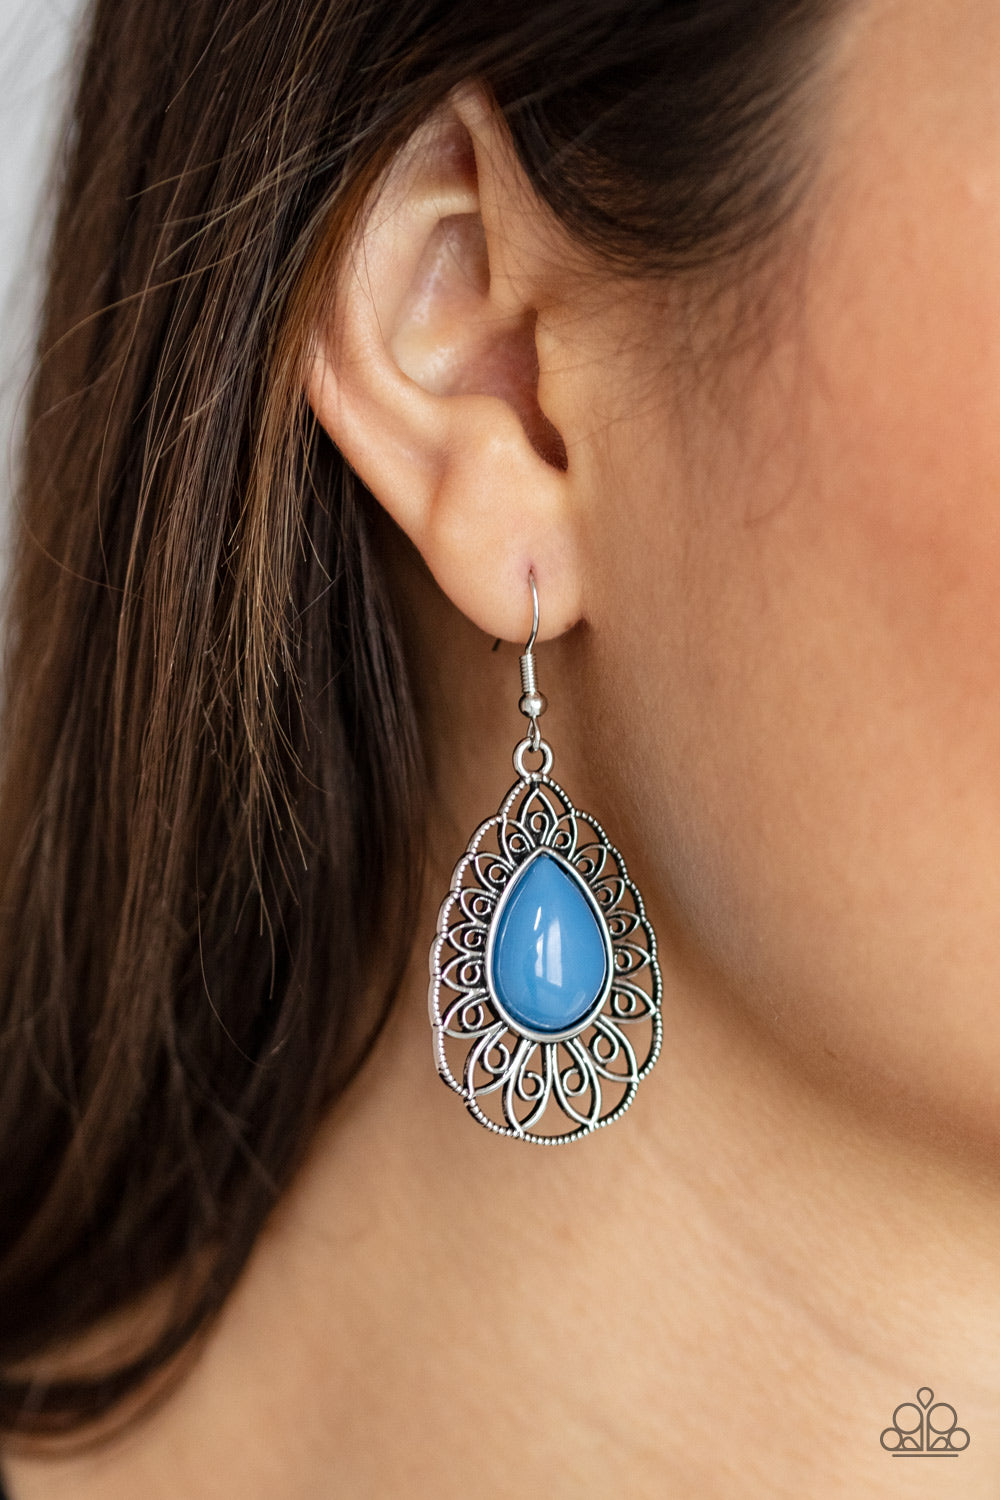 Dream STAYCATION Blue Earring - Paparazzi Accessories.  A shiny French Blue teardrop bead is pressed into the center of an airy silver teardrop frame radiating with ornate petals for a whimsical finesse. Earring attaches to a standard fishhook fitting.  ﻿All Paparazzi Accessories are lead free and nickel free!  Sold as one pair of earrings.